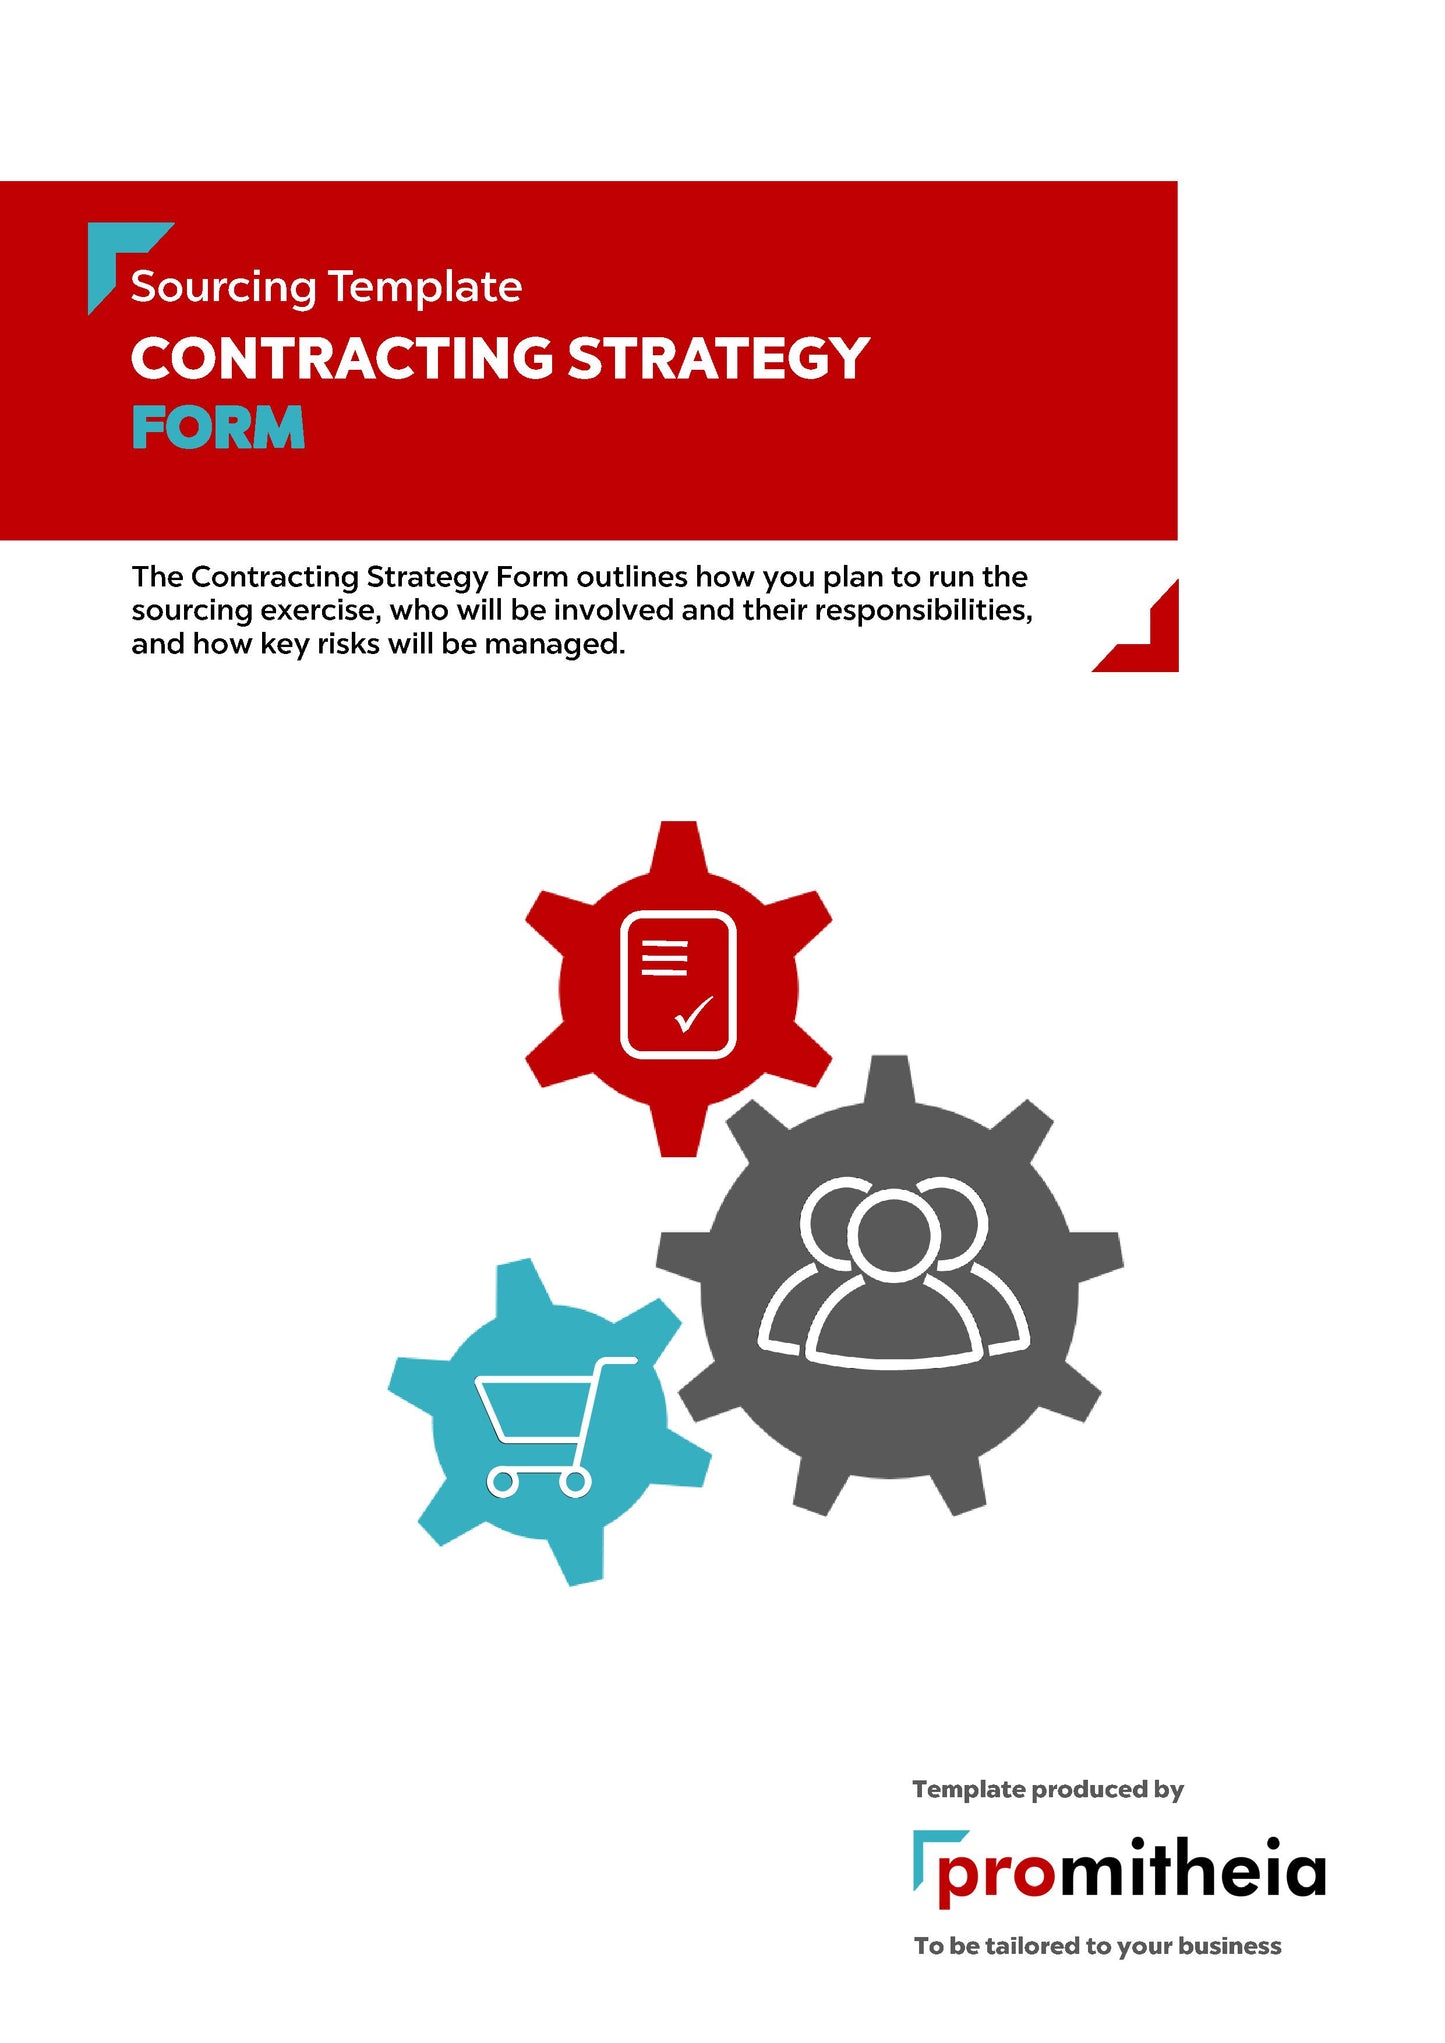 Contracting Strategy Form